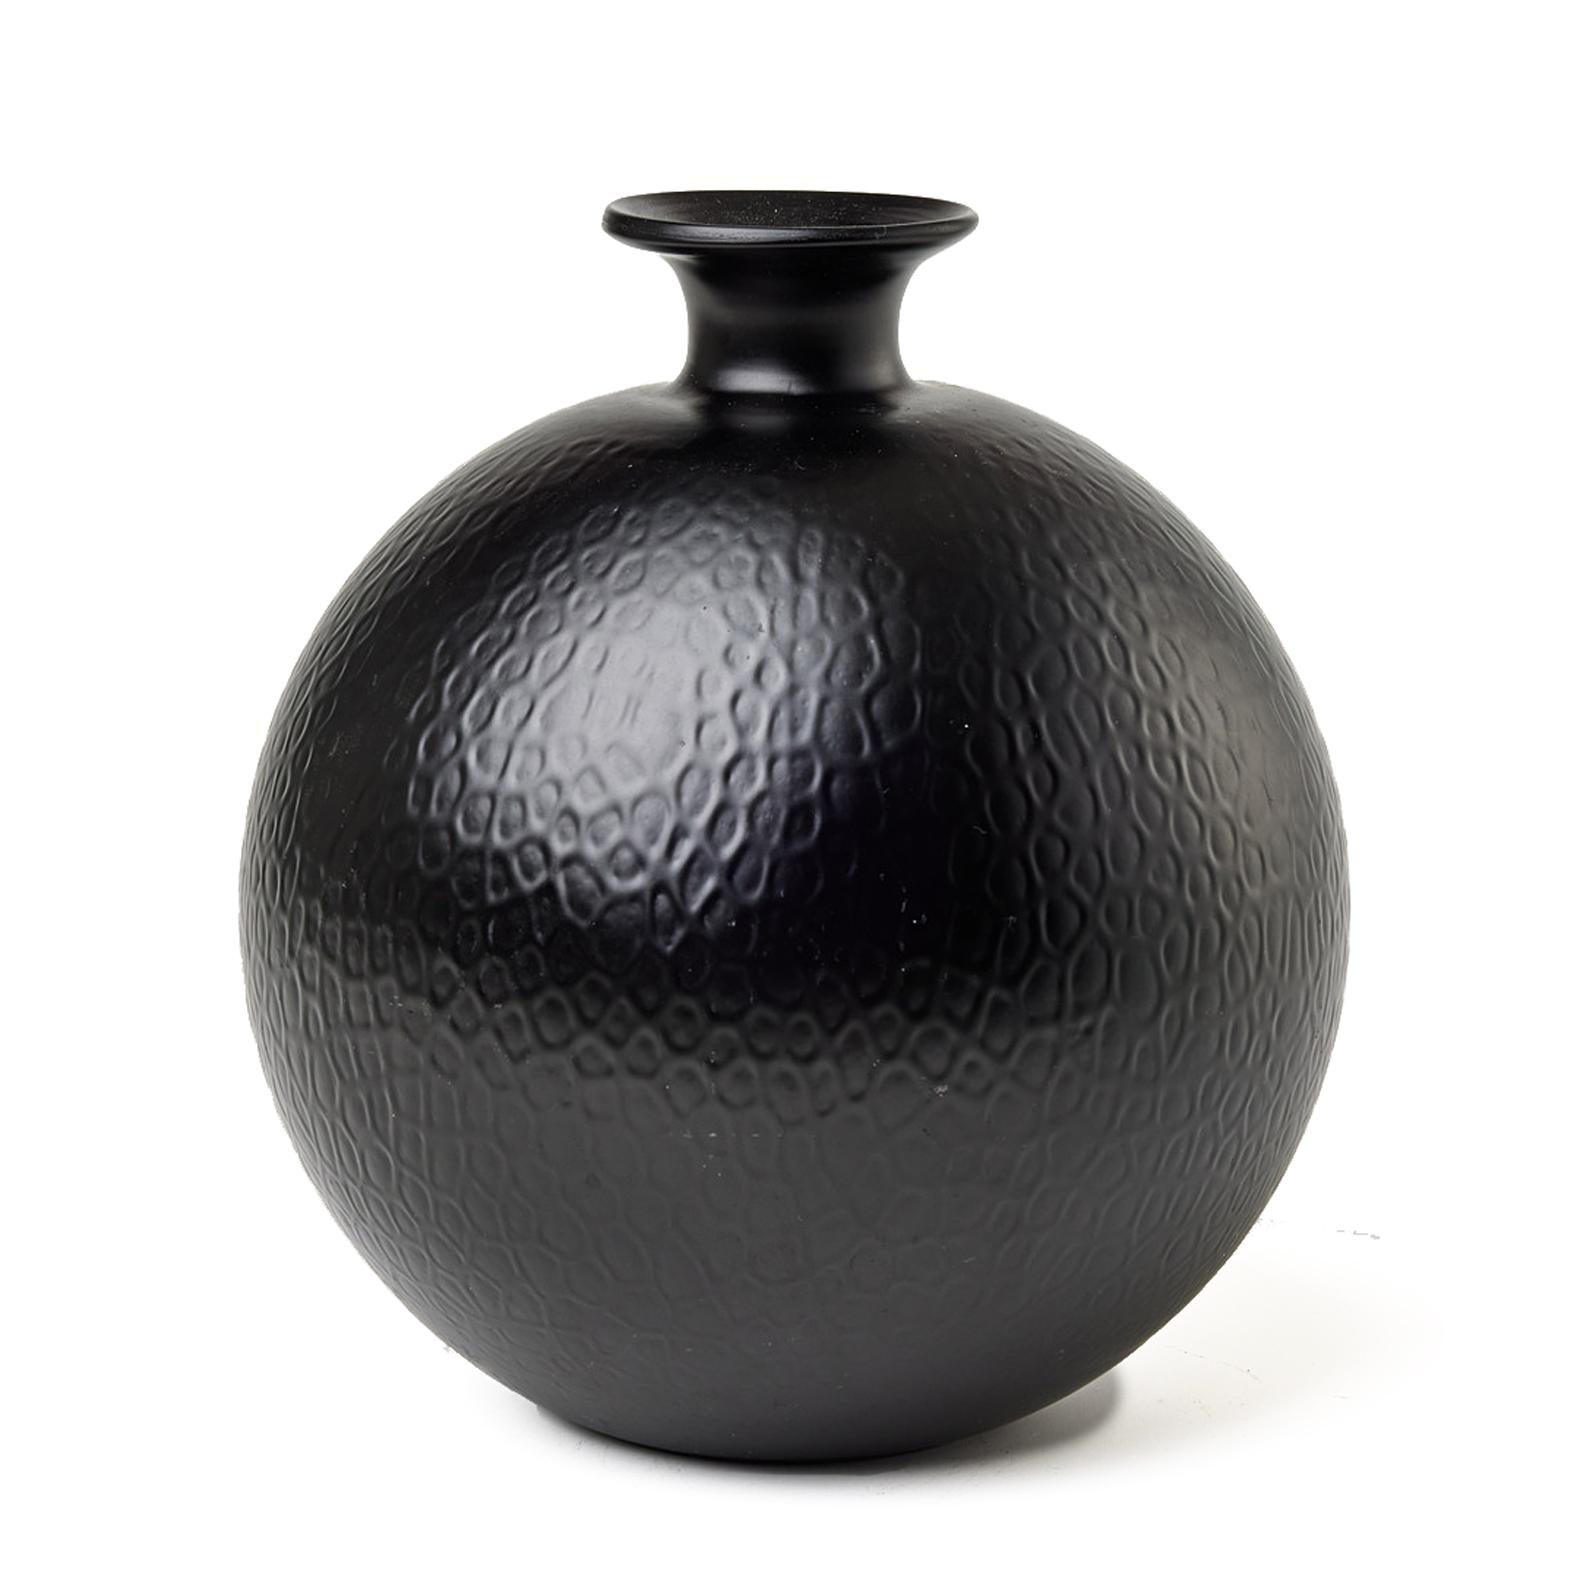 The black Cryopas Flowerball vase, designed in 1934 by Harald Elof Notini for Böhlmarks and produced by Pukeberg's Glass Factory, stands as a sublime functionalist piece in opaque glass. Notini's 'Flowerball' in Cryopas glass boasts a hammered